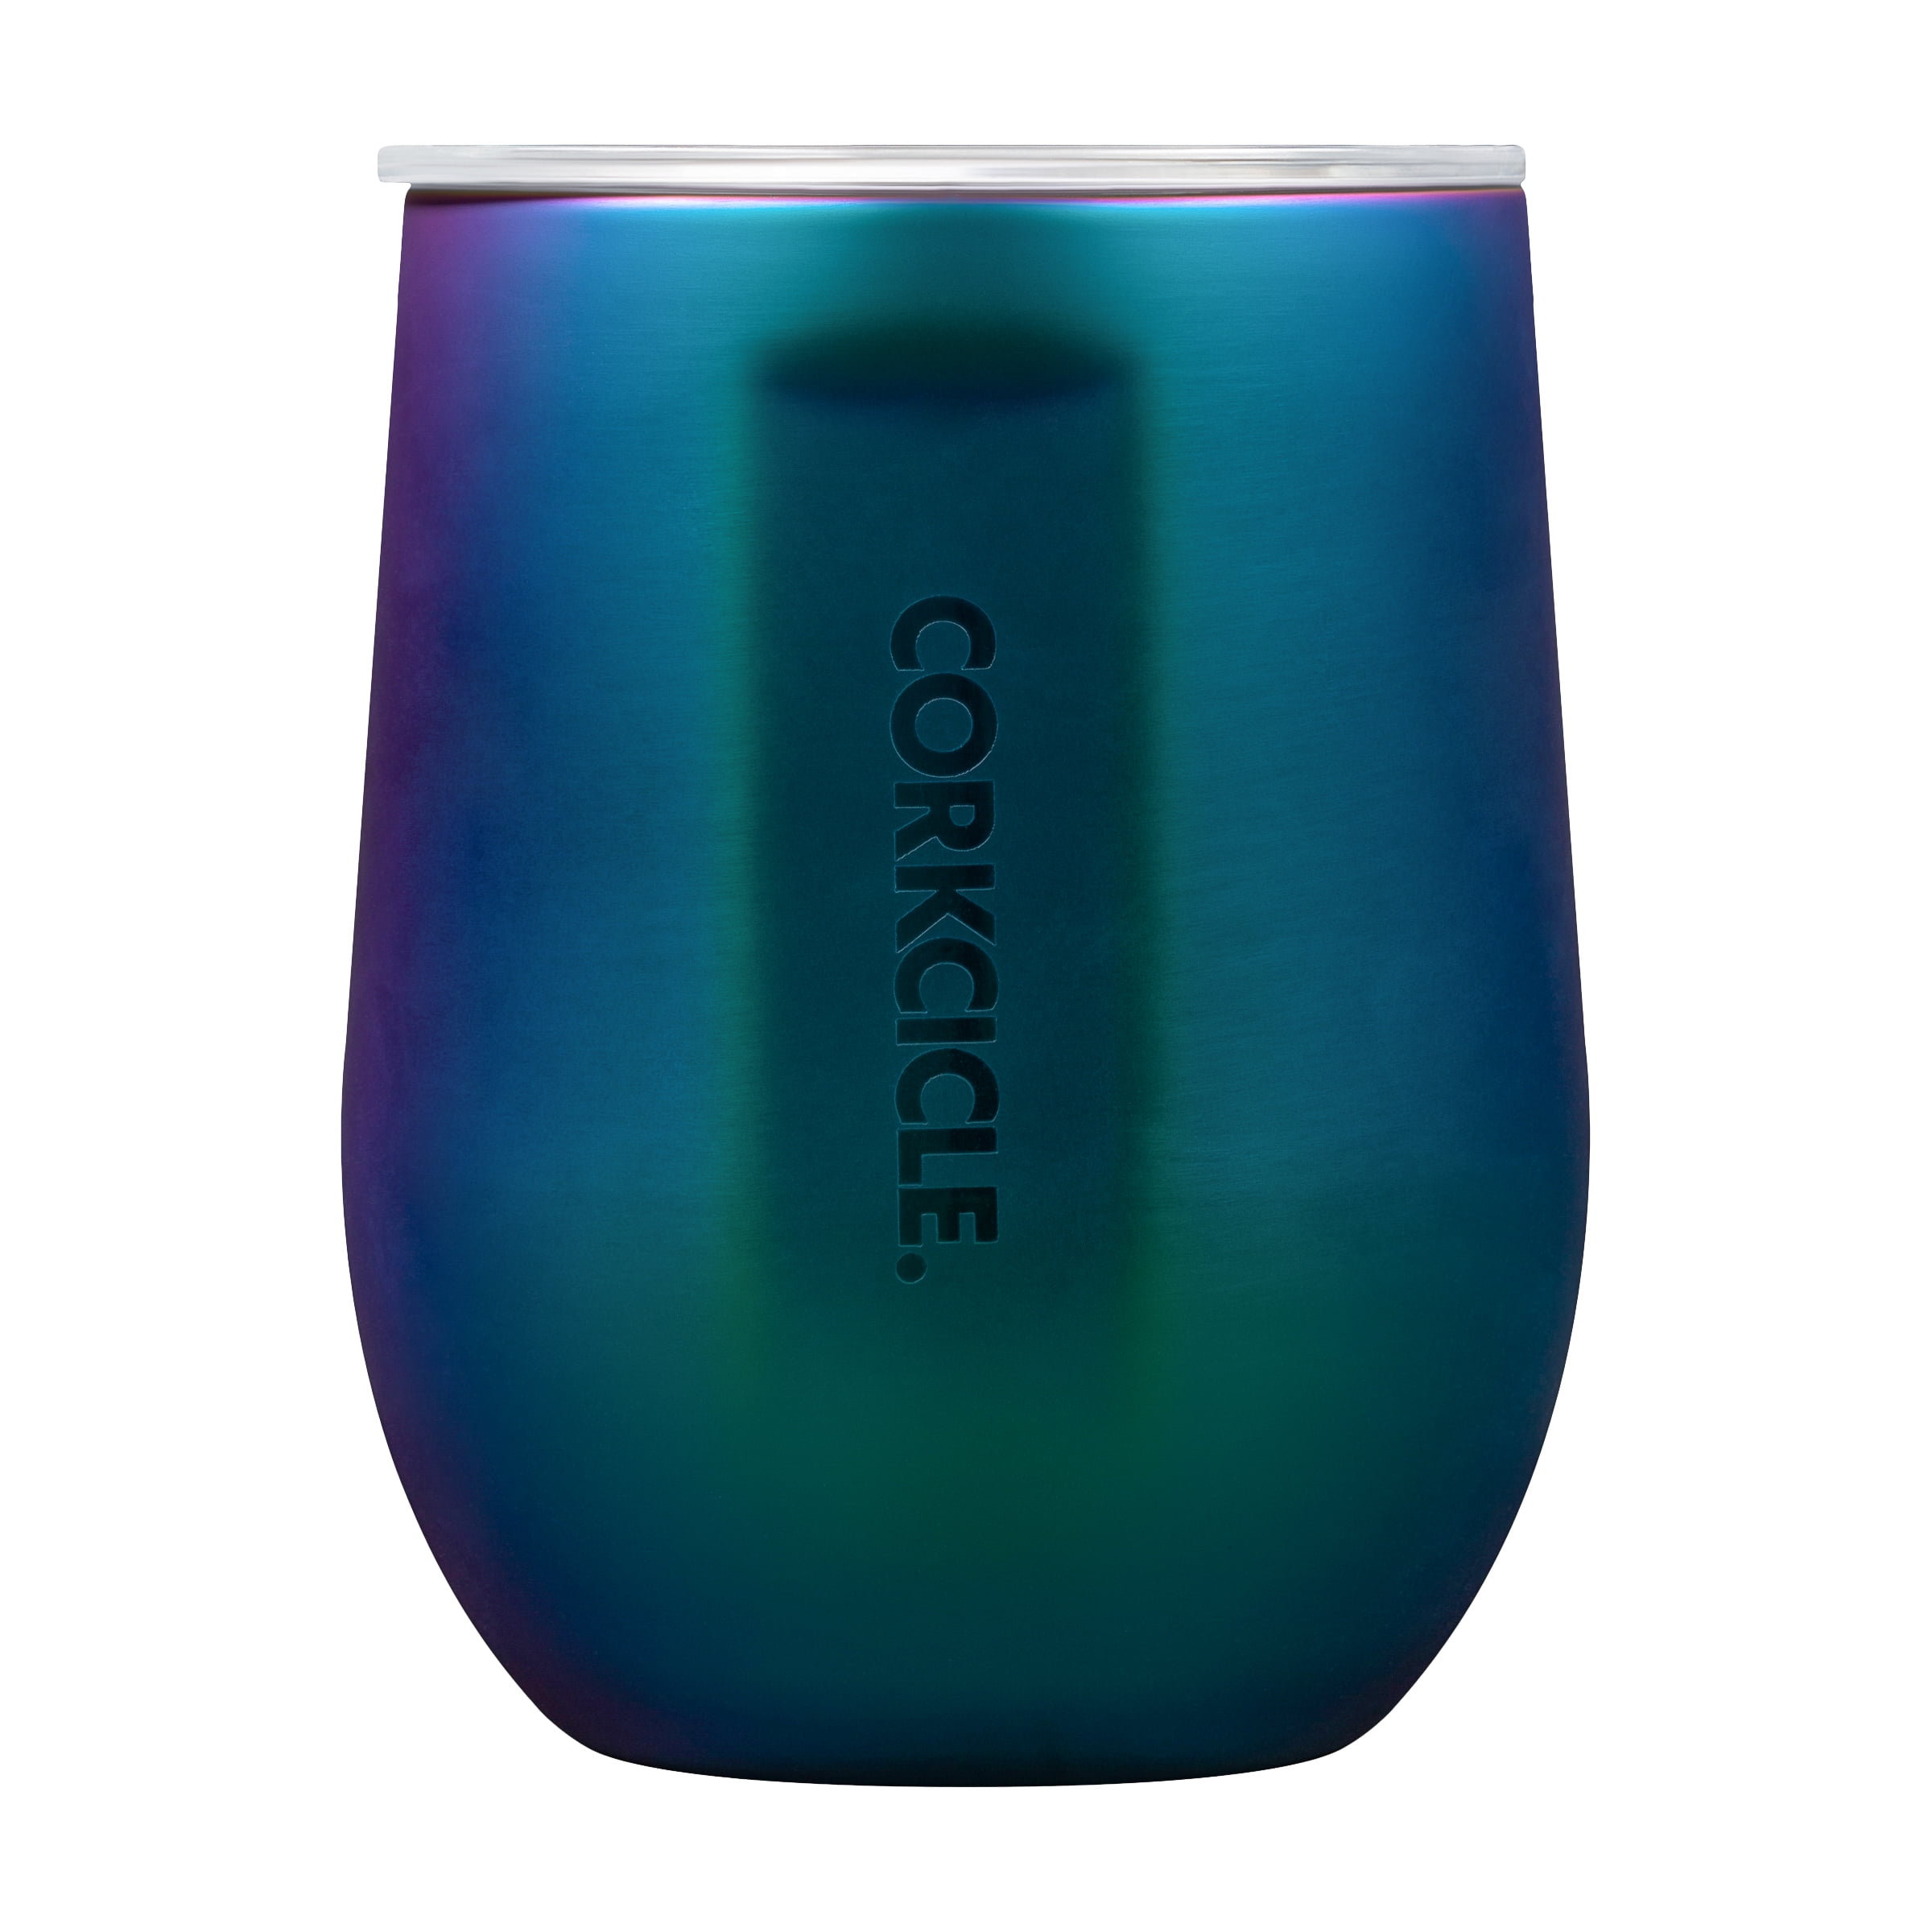 Corkcicle 12 oz Stemless Wine Glass, Triple Insulated Stainless